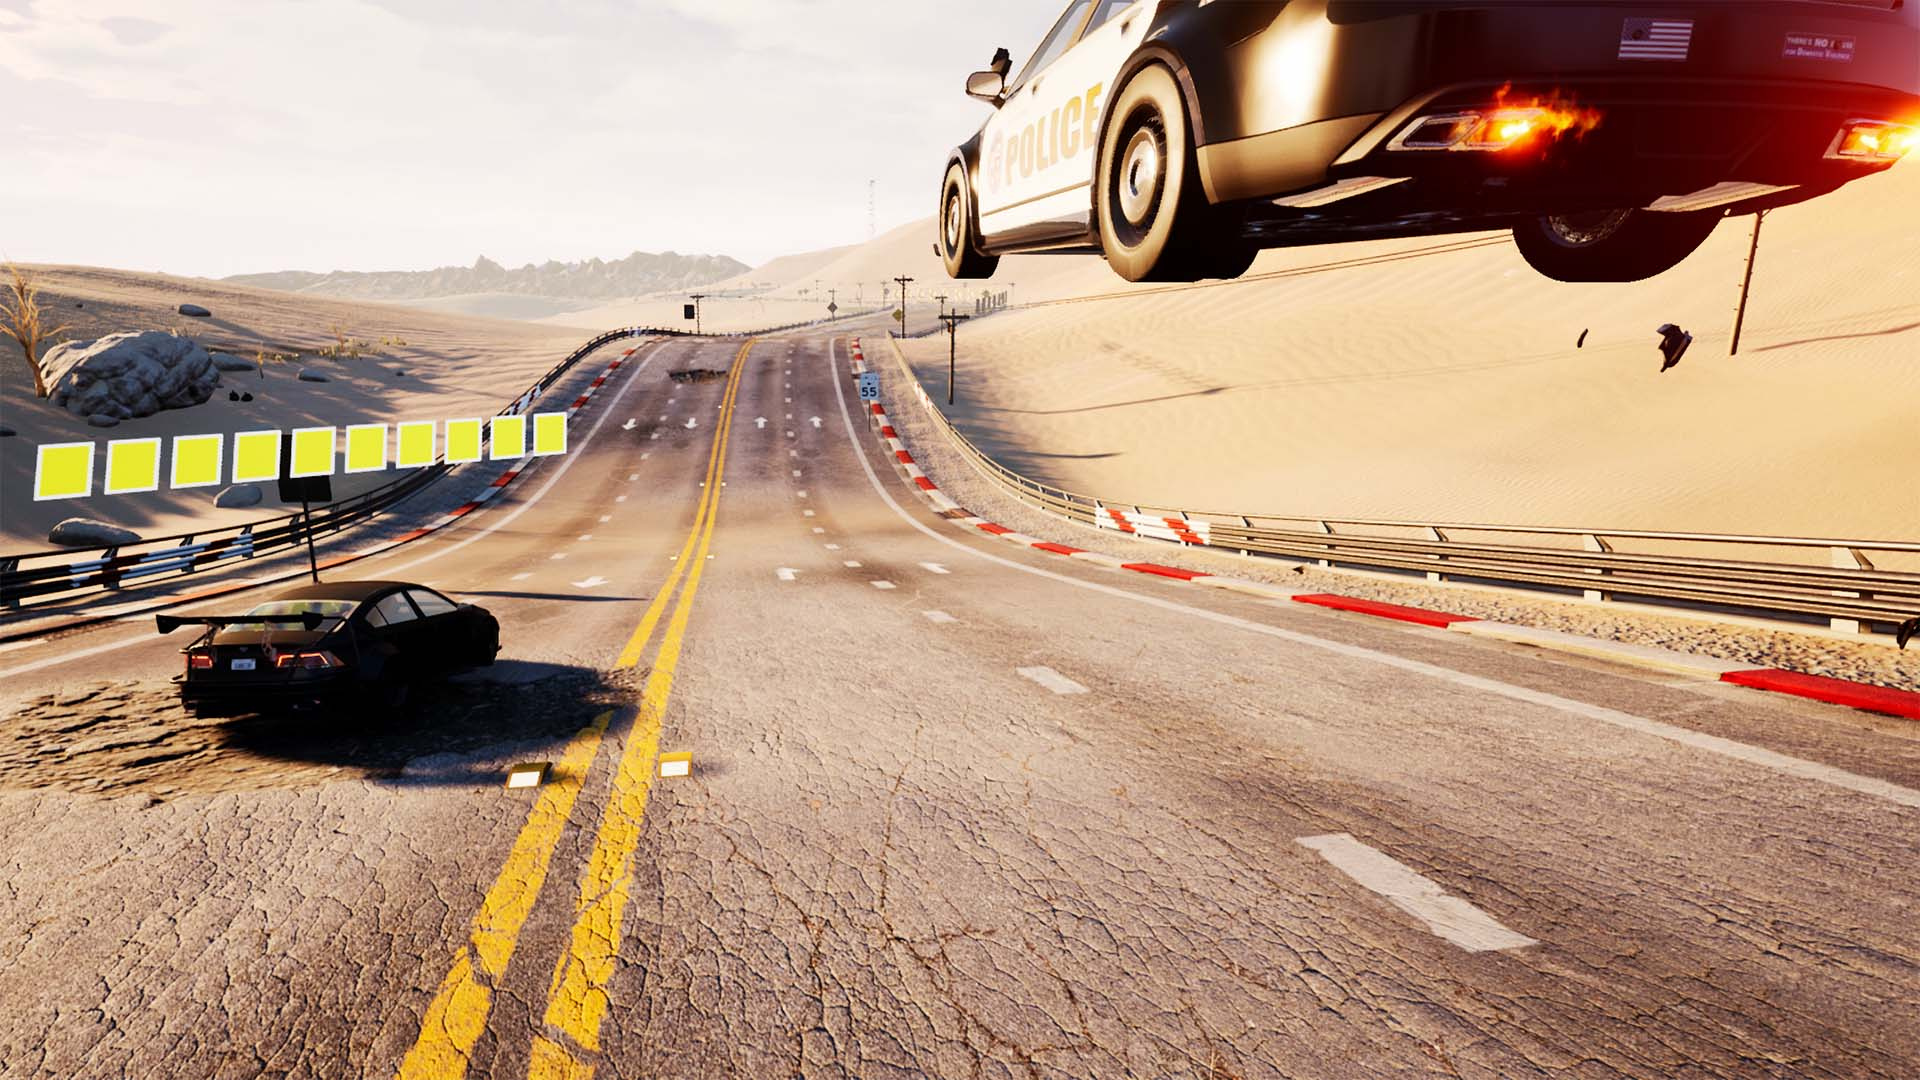 Dangerous Driving (PS4 / PlayStation 4) Game Profile | News, Reviews